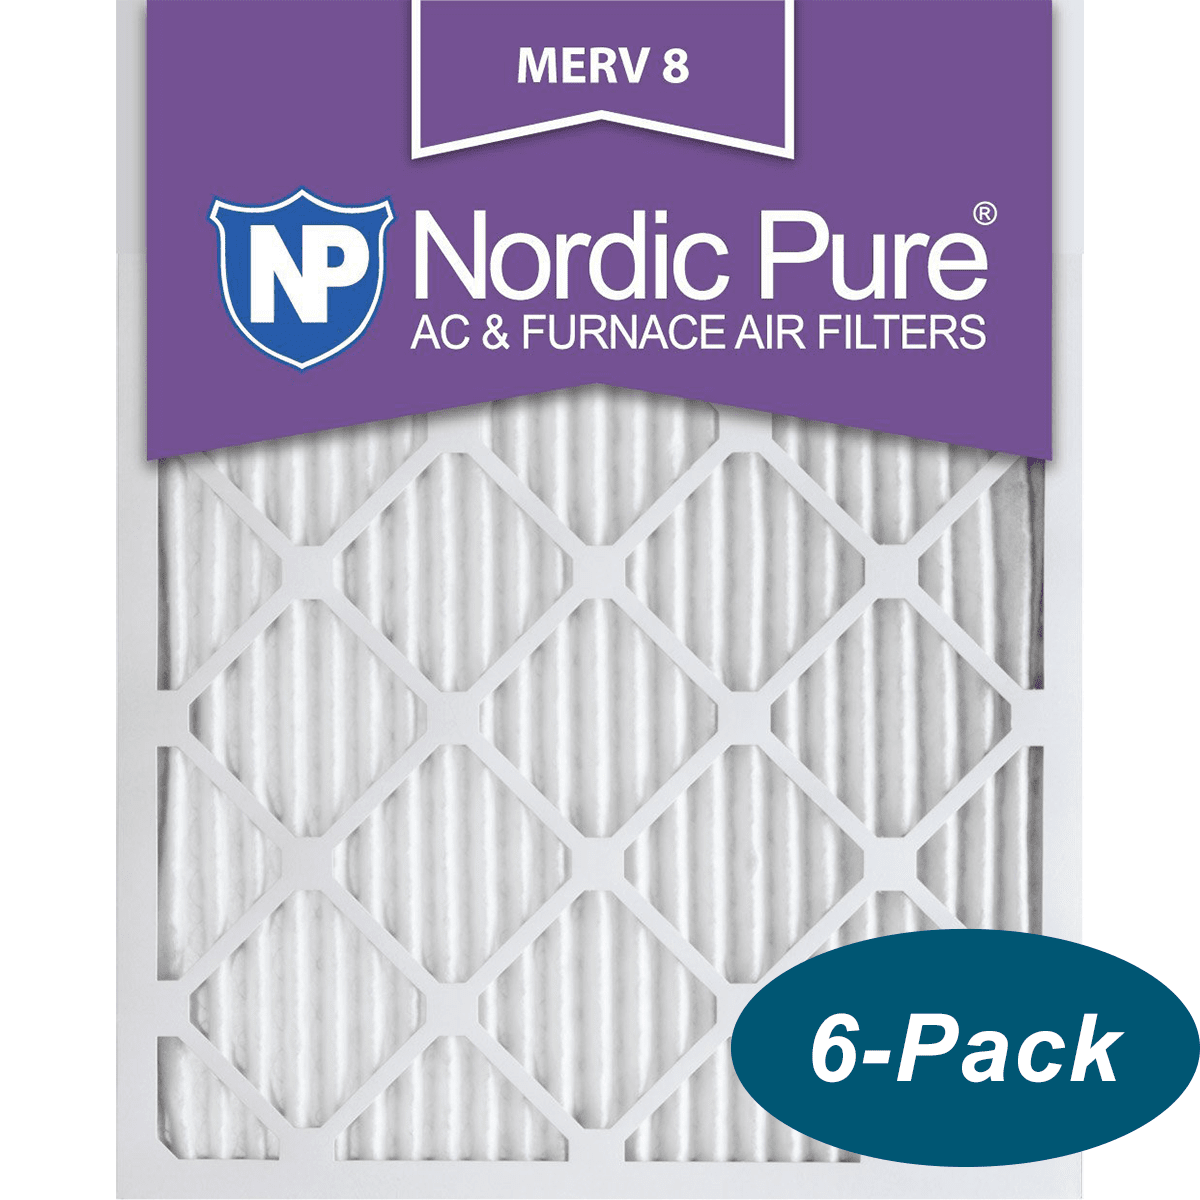 Nordic Pure MERV 8 Pleated Furnace Filter 16x25x1 6-Pack (16x25x1M8-6)